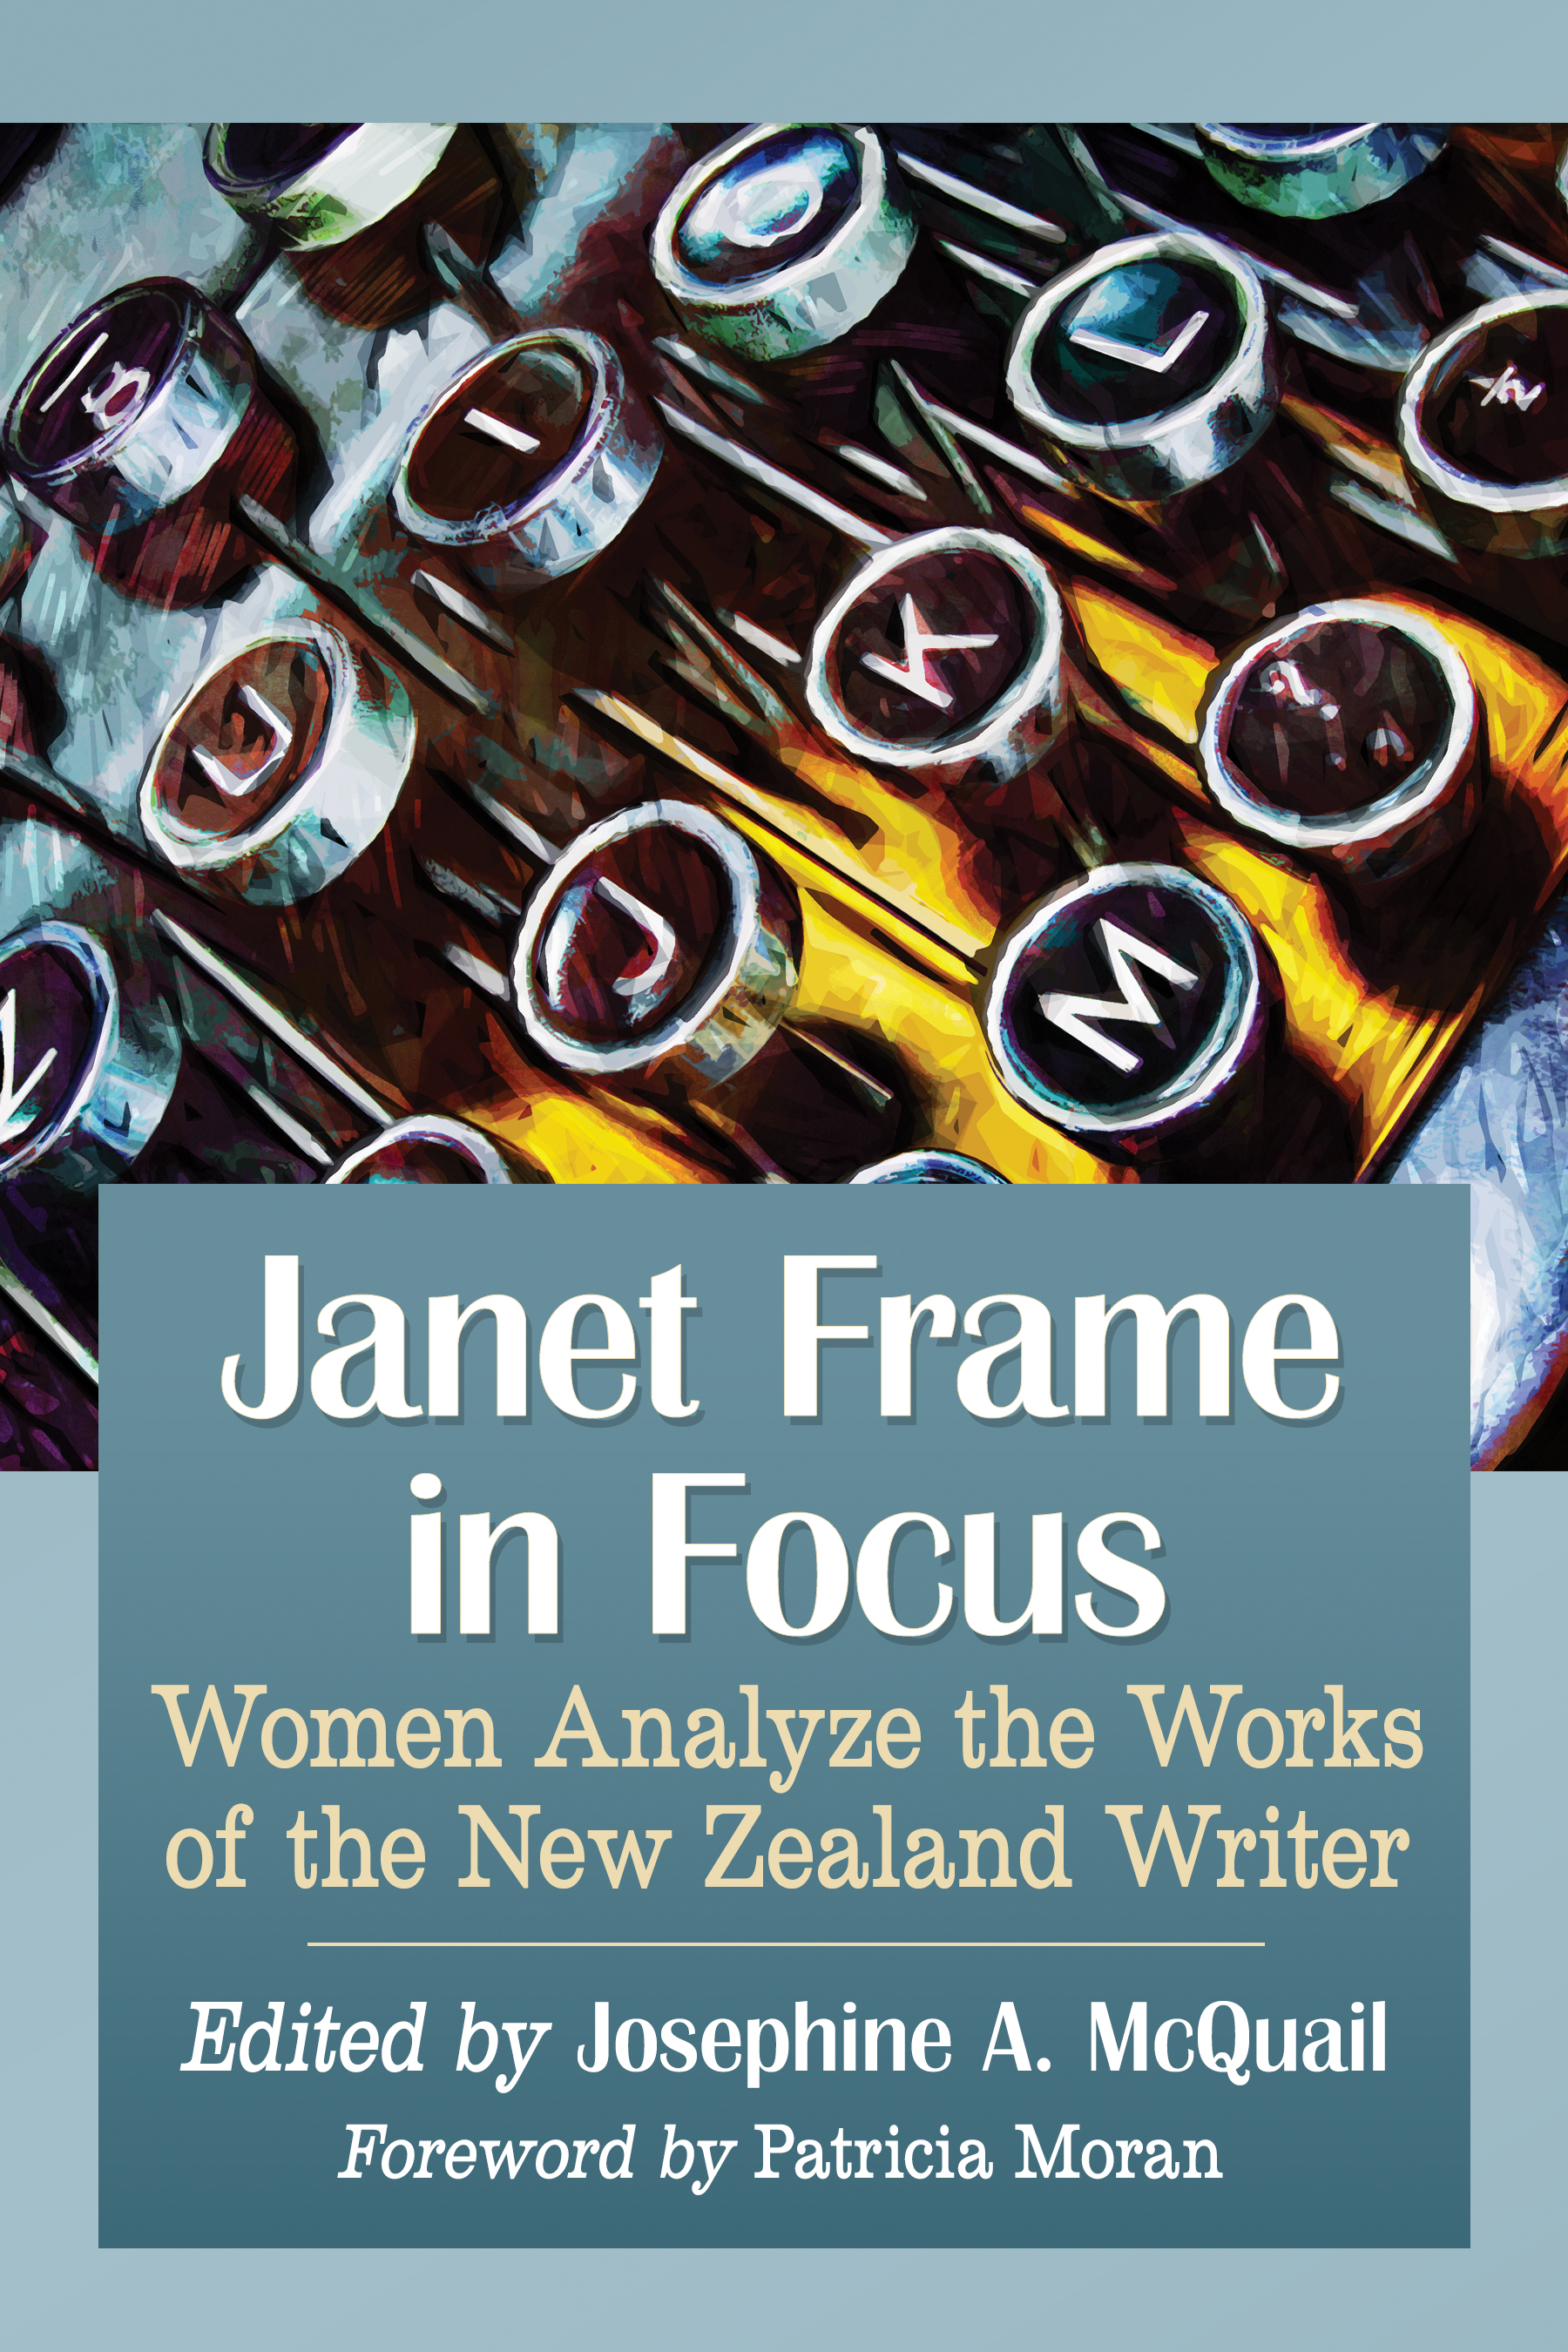 Janet Frame in focus women analyze the works of the New Zealand writer - image 1